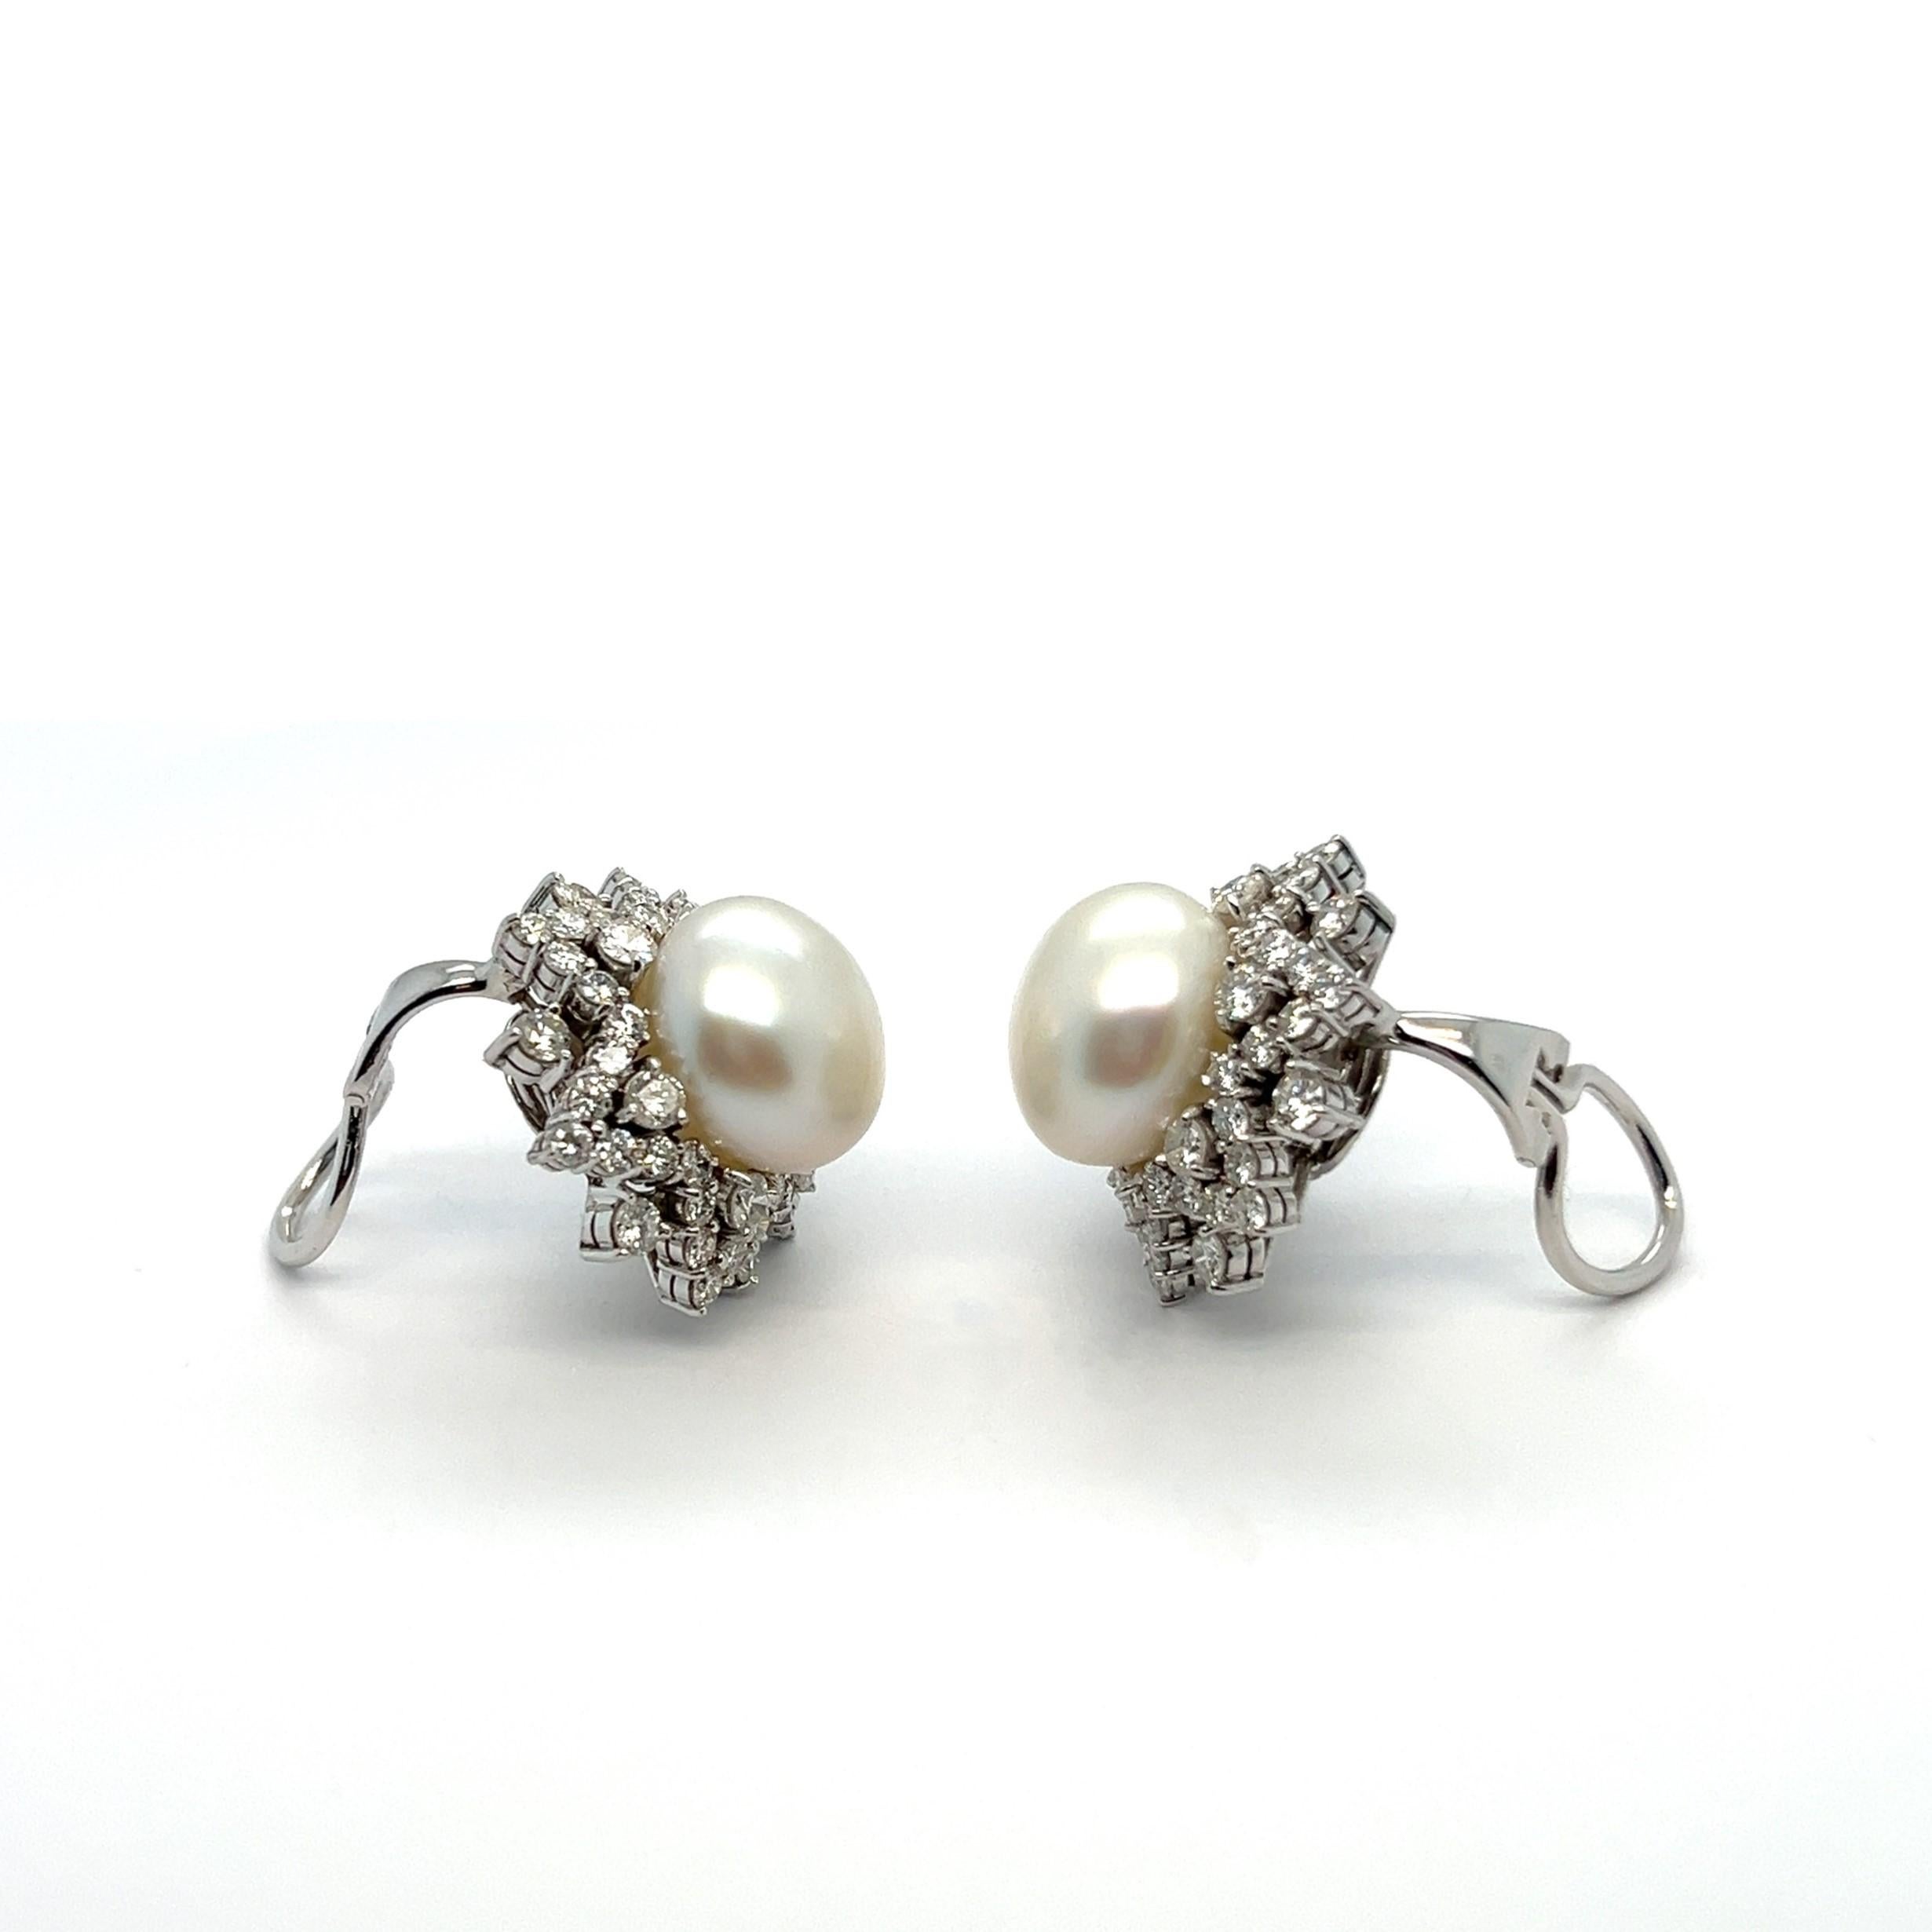 South Sea Pearl Earrings in 18 Karat White Gold by Meister For Sale 7